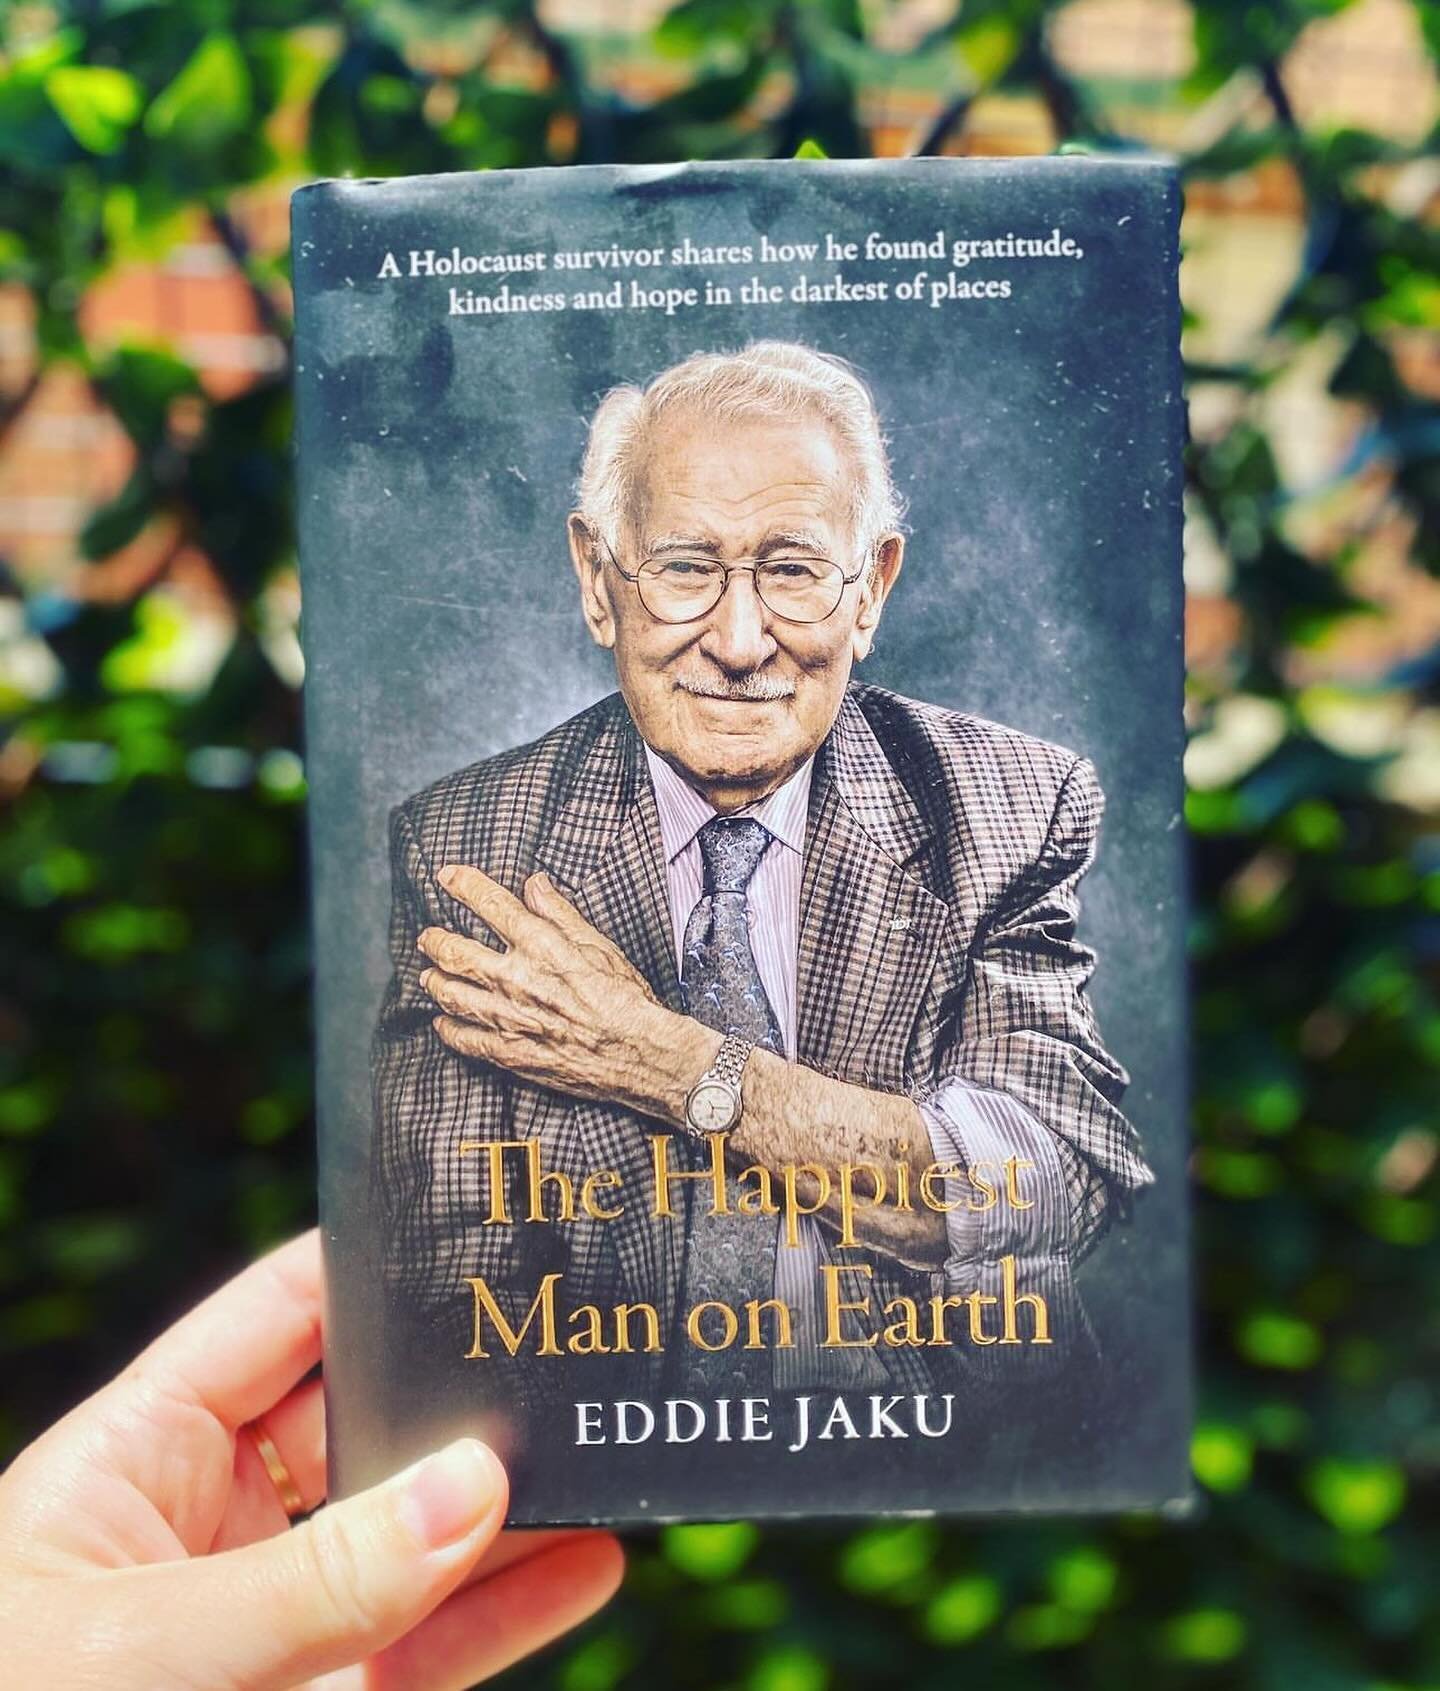 &ldquo;If you have the opportunity today, please go home and tell your mother how much you love her. Do this for your mother. And do it for your new friend, Eddie, who cannot tell it to his mother.&rdquo; - Eddie Jaku OAM